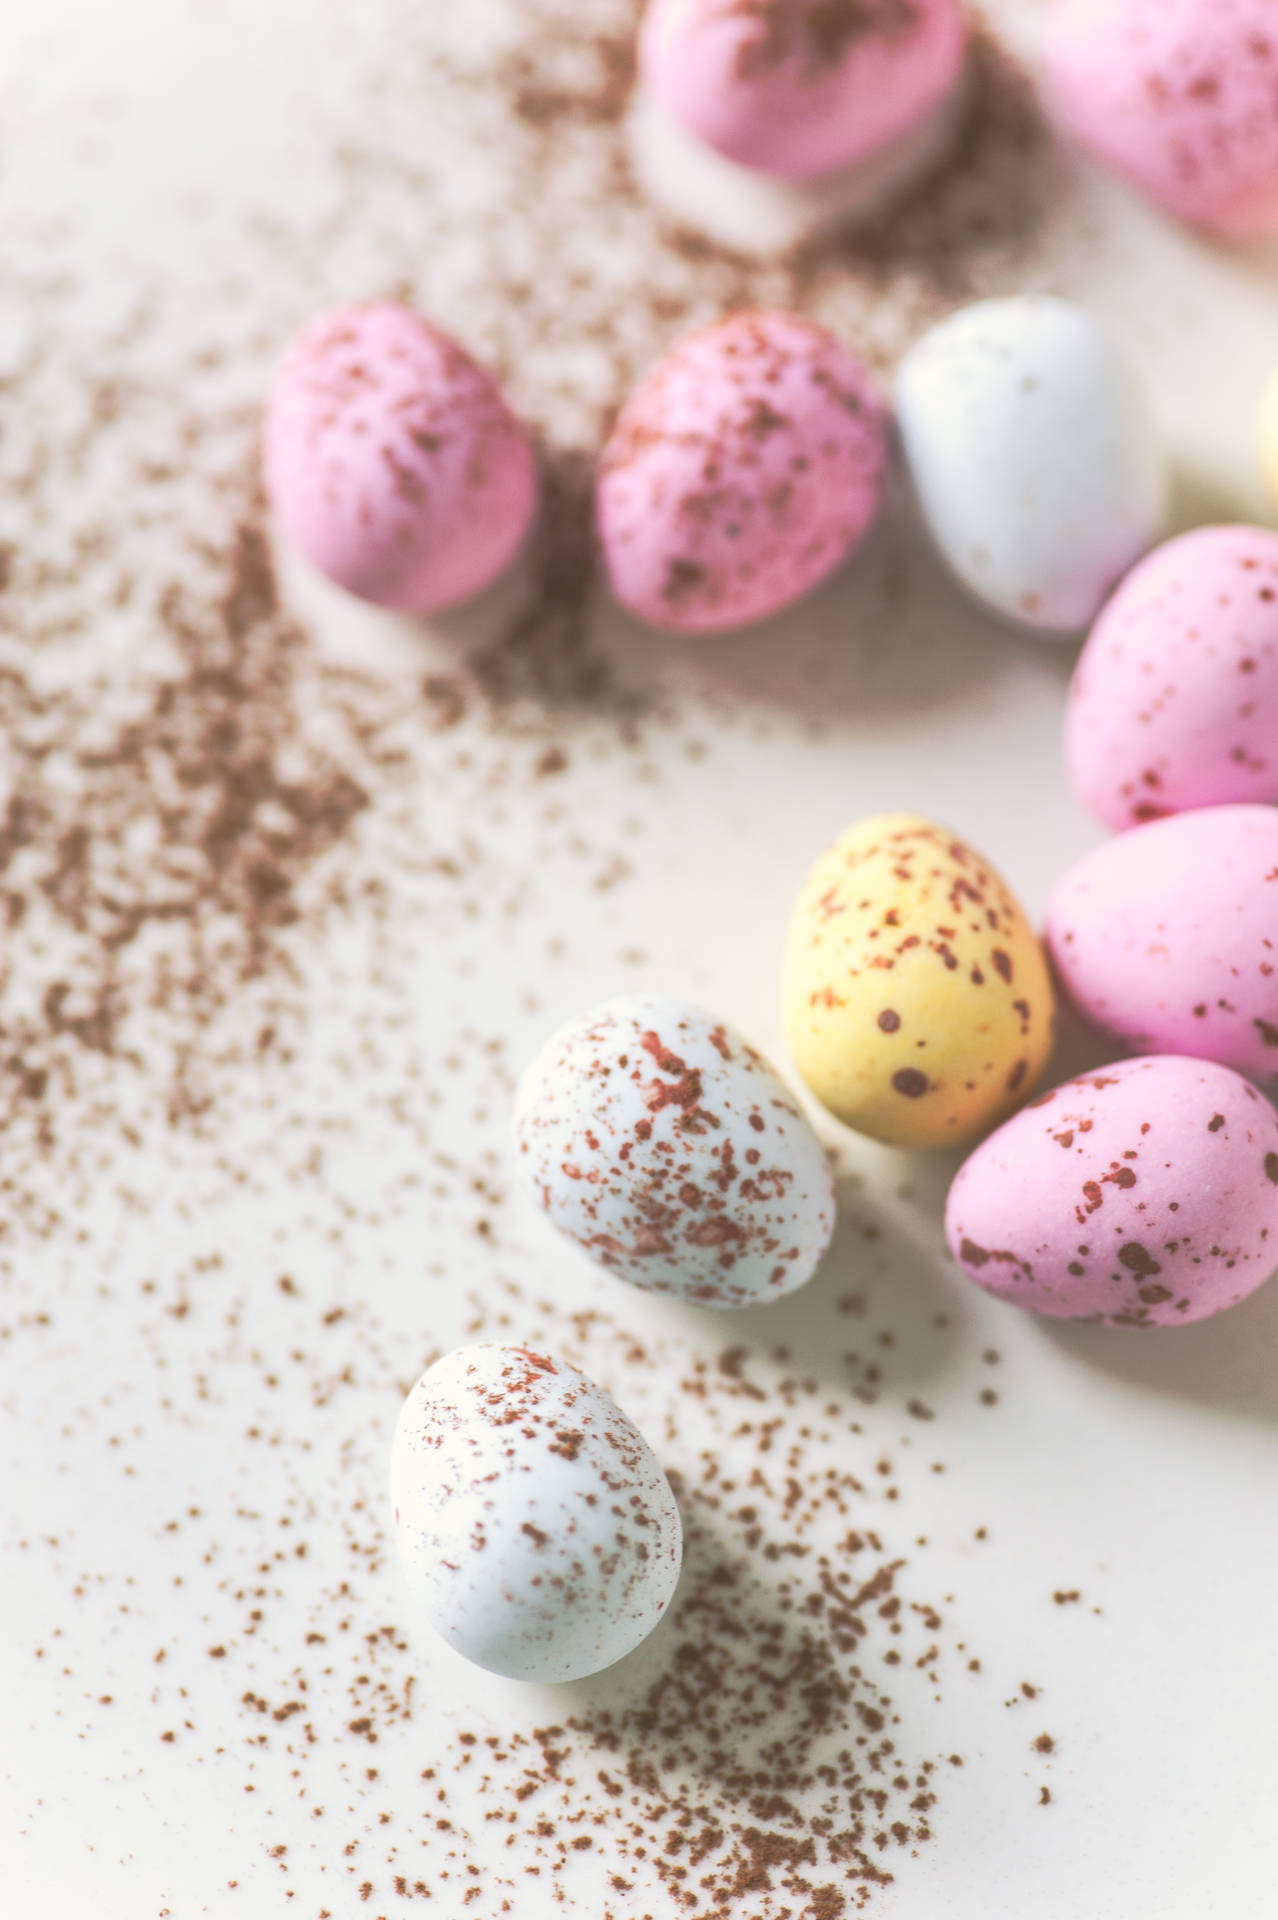 Celebrate Easter With Chocolate-covered Eggs! Wallpaper